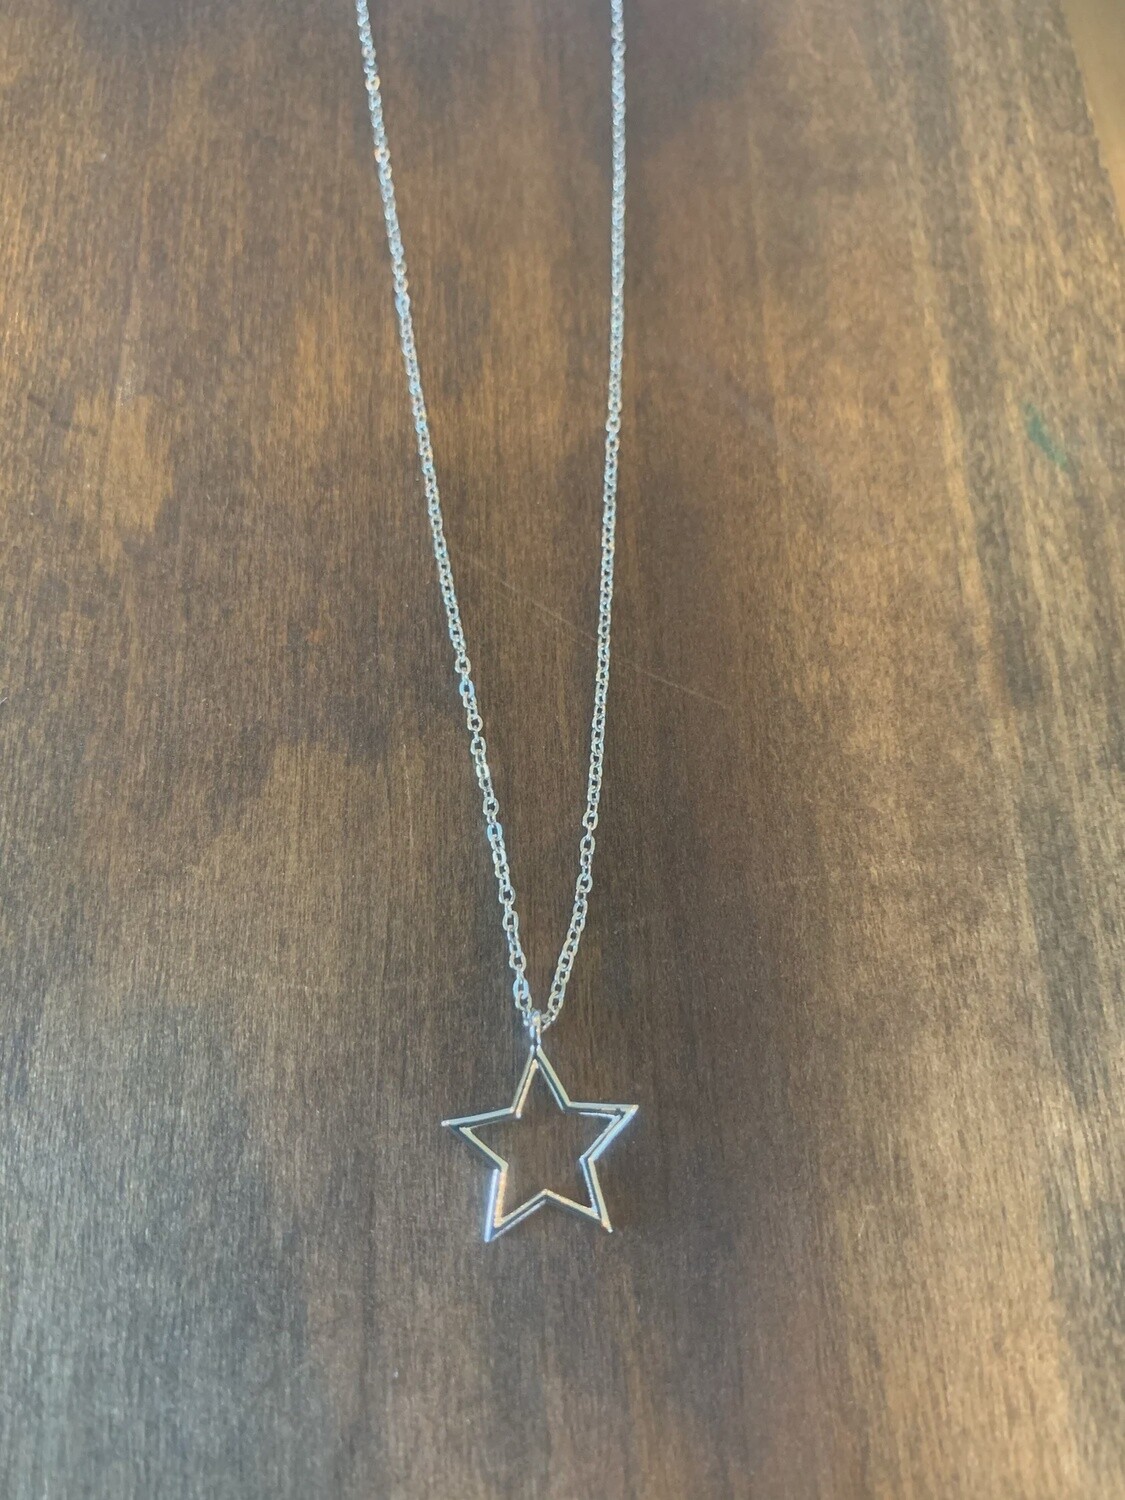 Star Pendant Necklace Silver